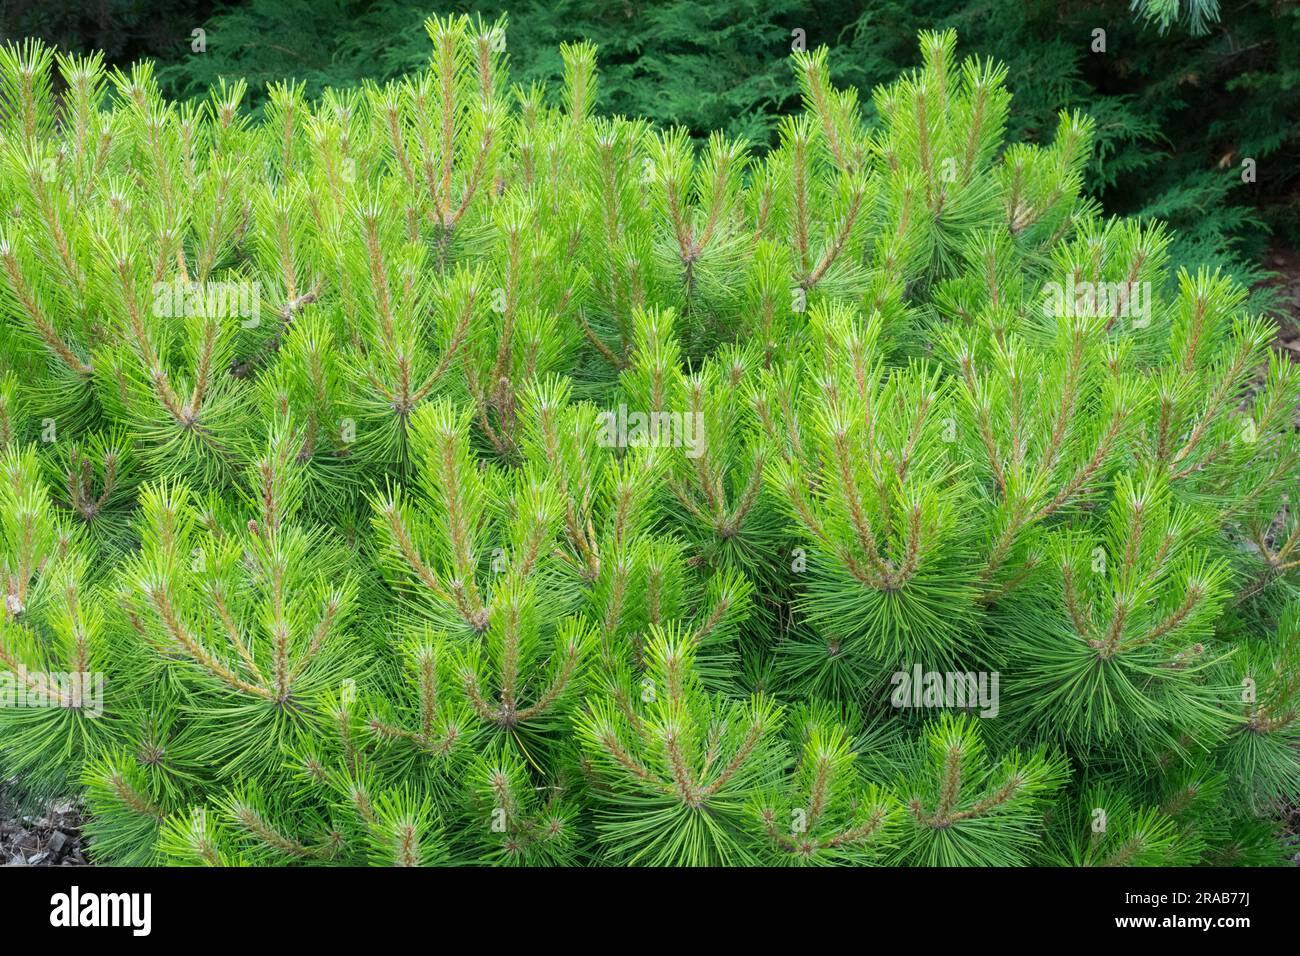 Red Pine, Pinus resinosa "Don Smith", Needles, Branches, Pine, American Red Pine, Cultivar, Pin Rouge, Garden Pinus foliage Stock Photo